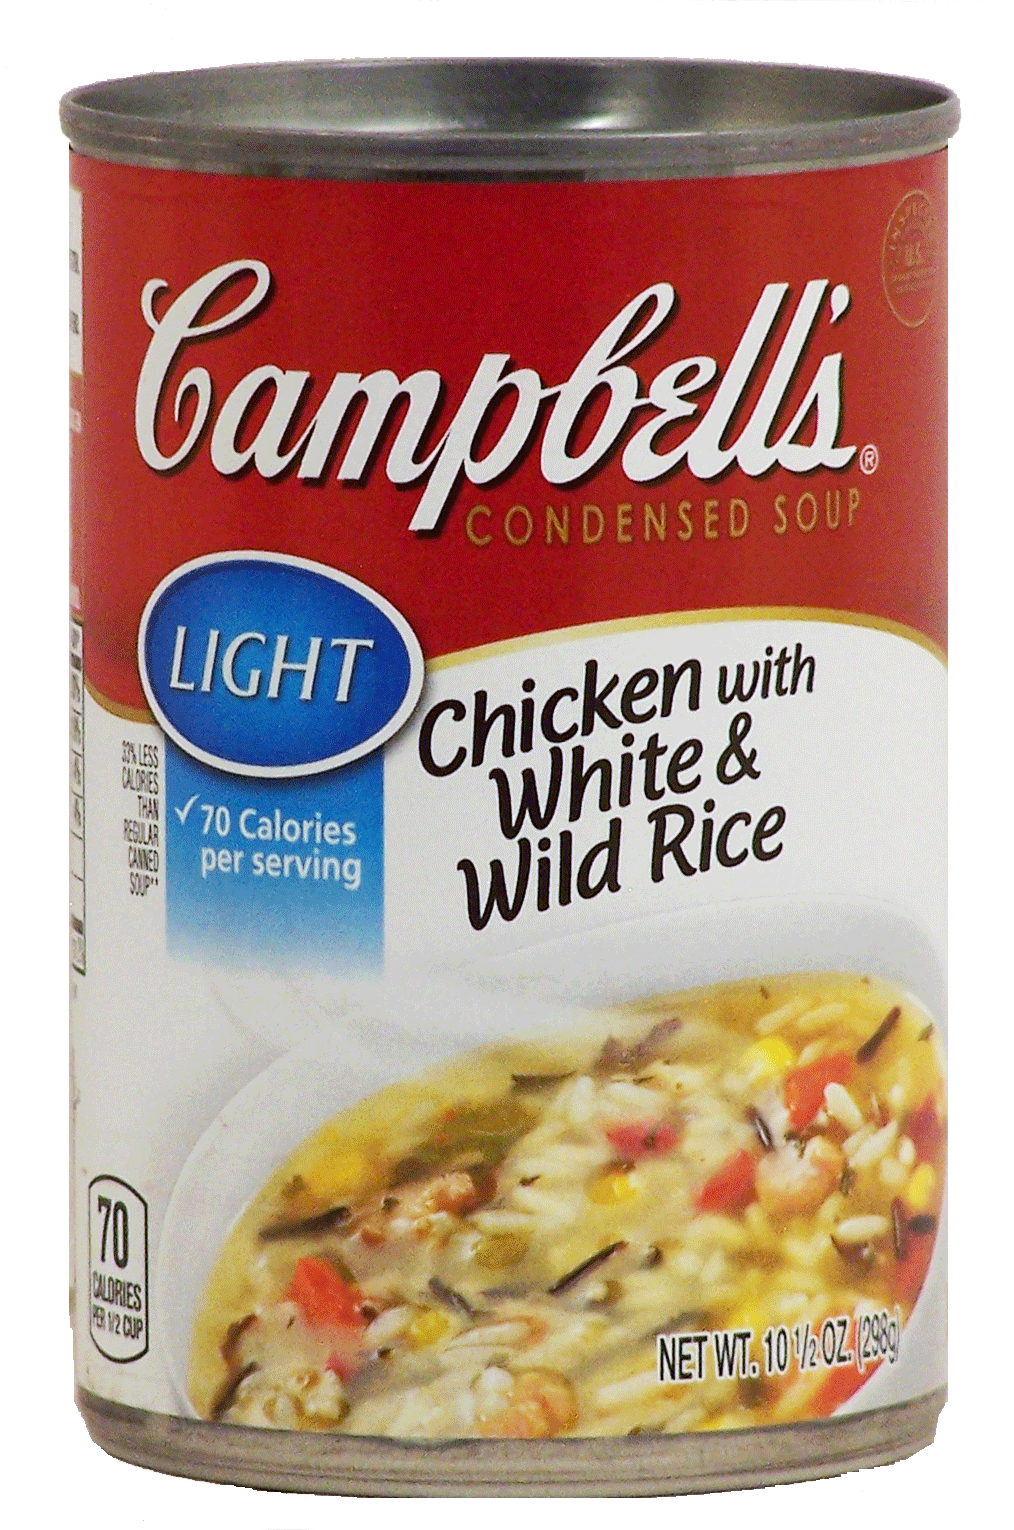 Campbell's Classics chicken with white & wild rice condensed soup Full-Size Picture